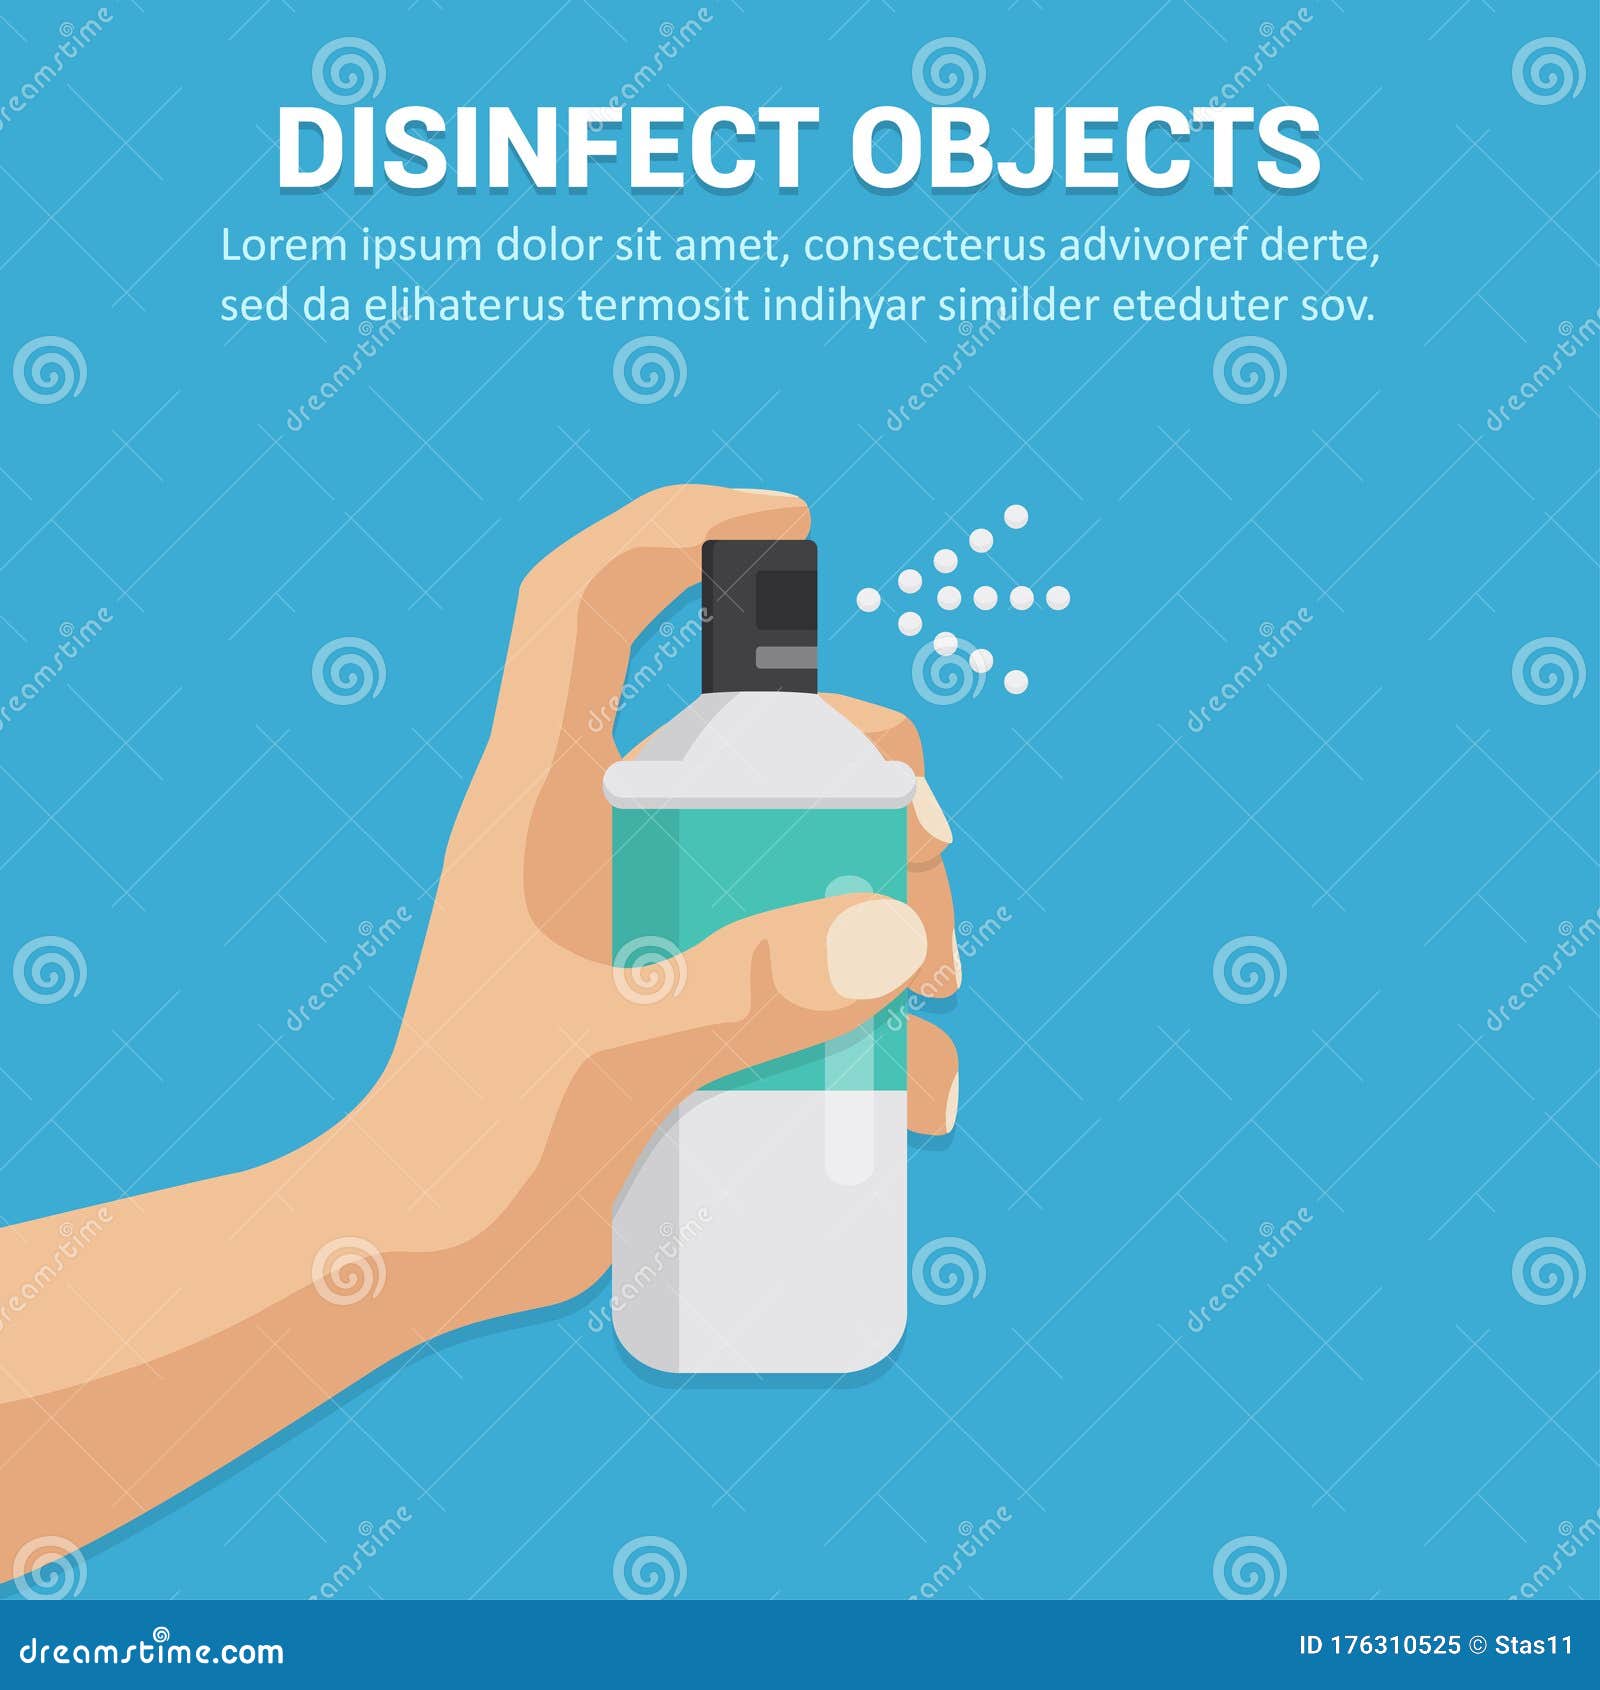 Disinfect Objects With Spray Concept In A Flat Design Vector